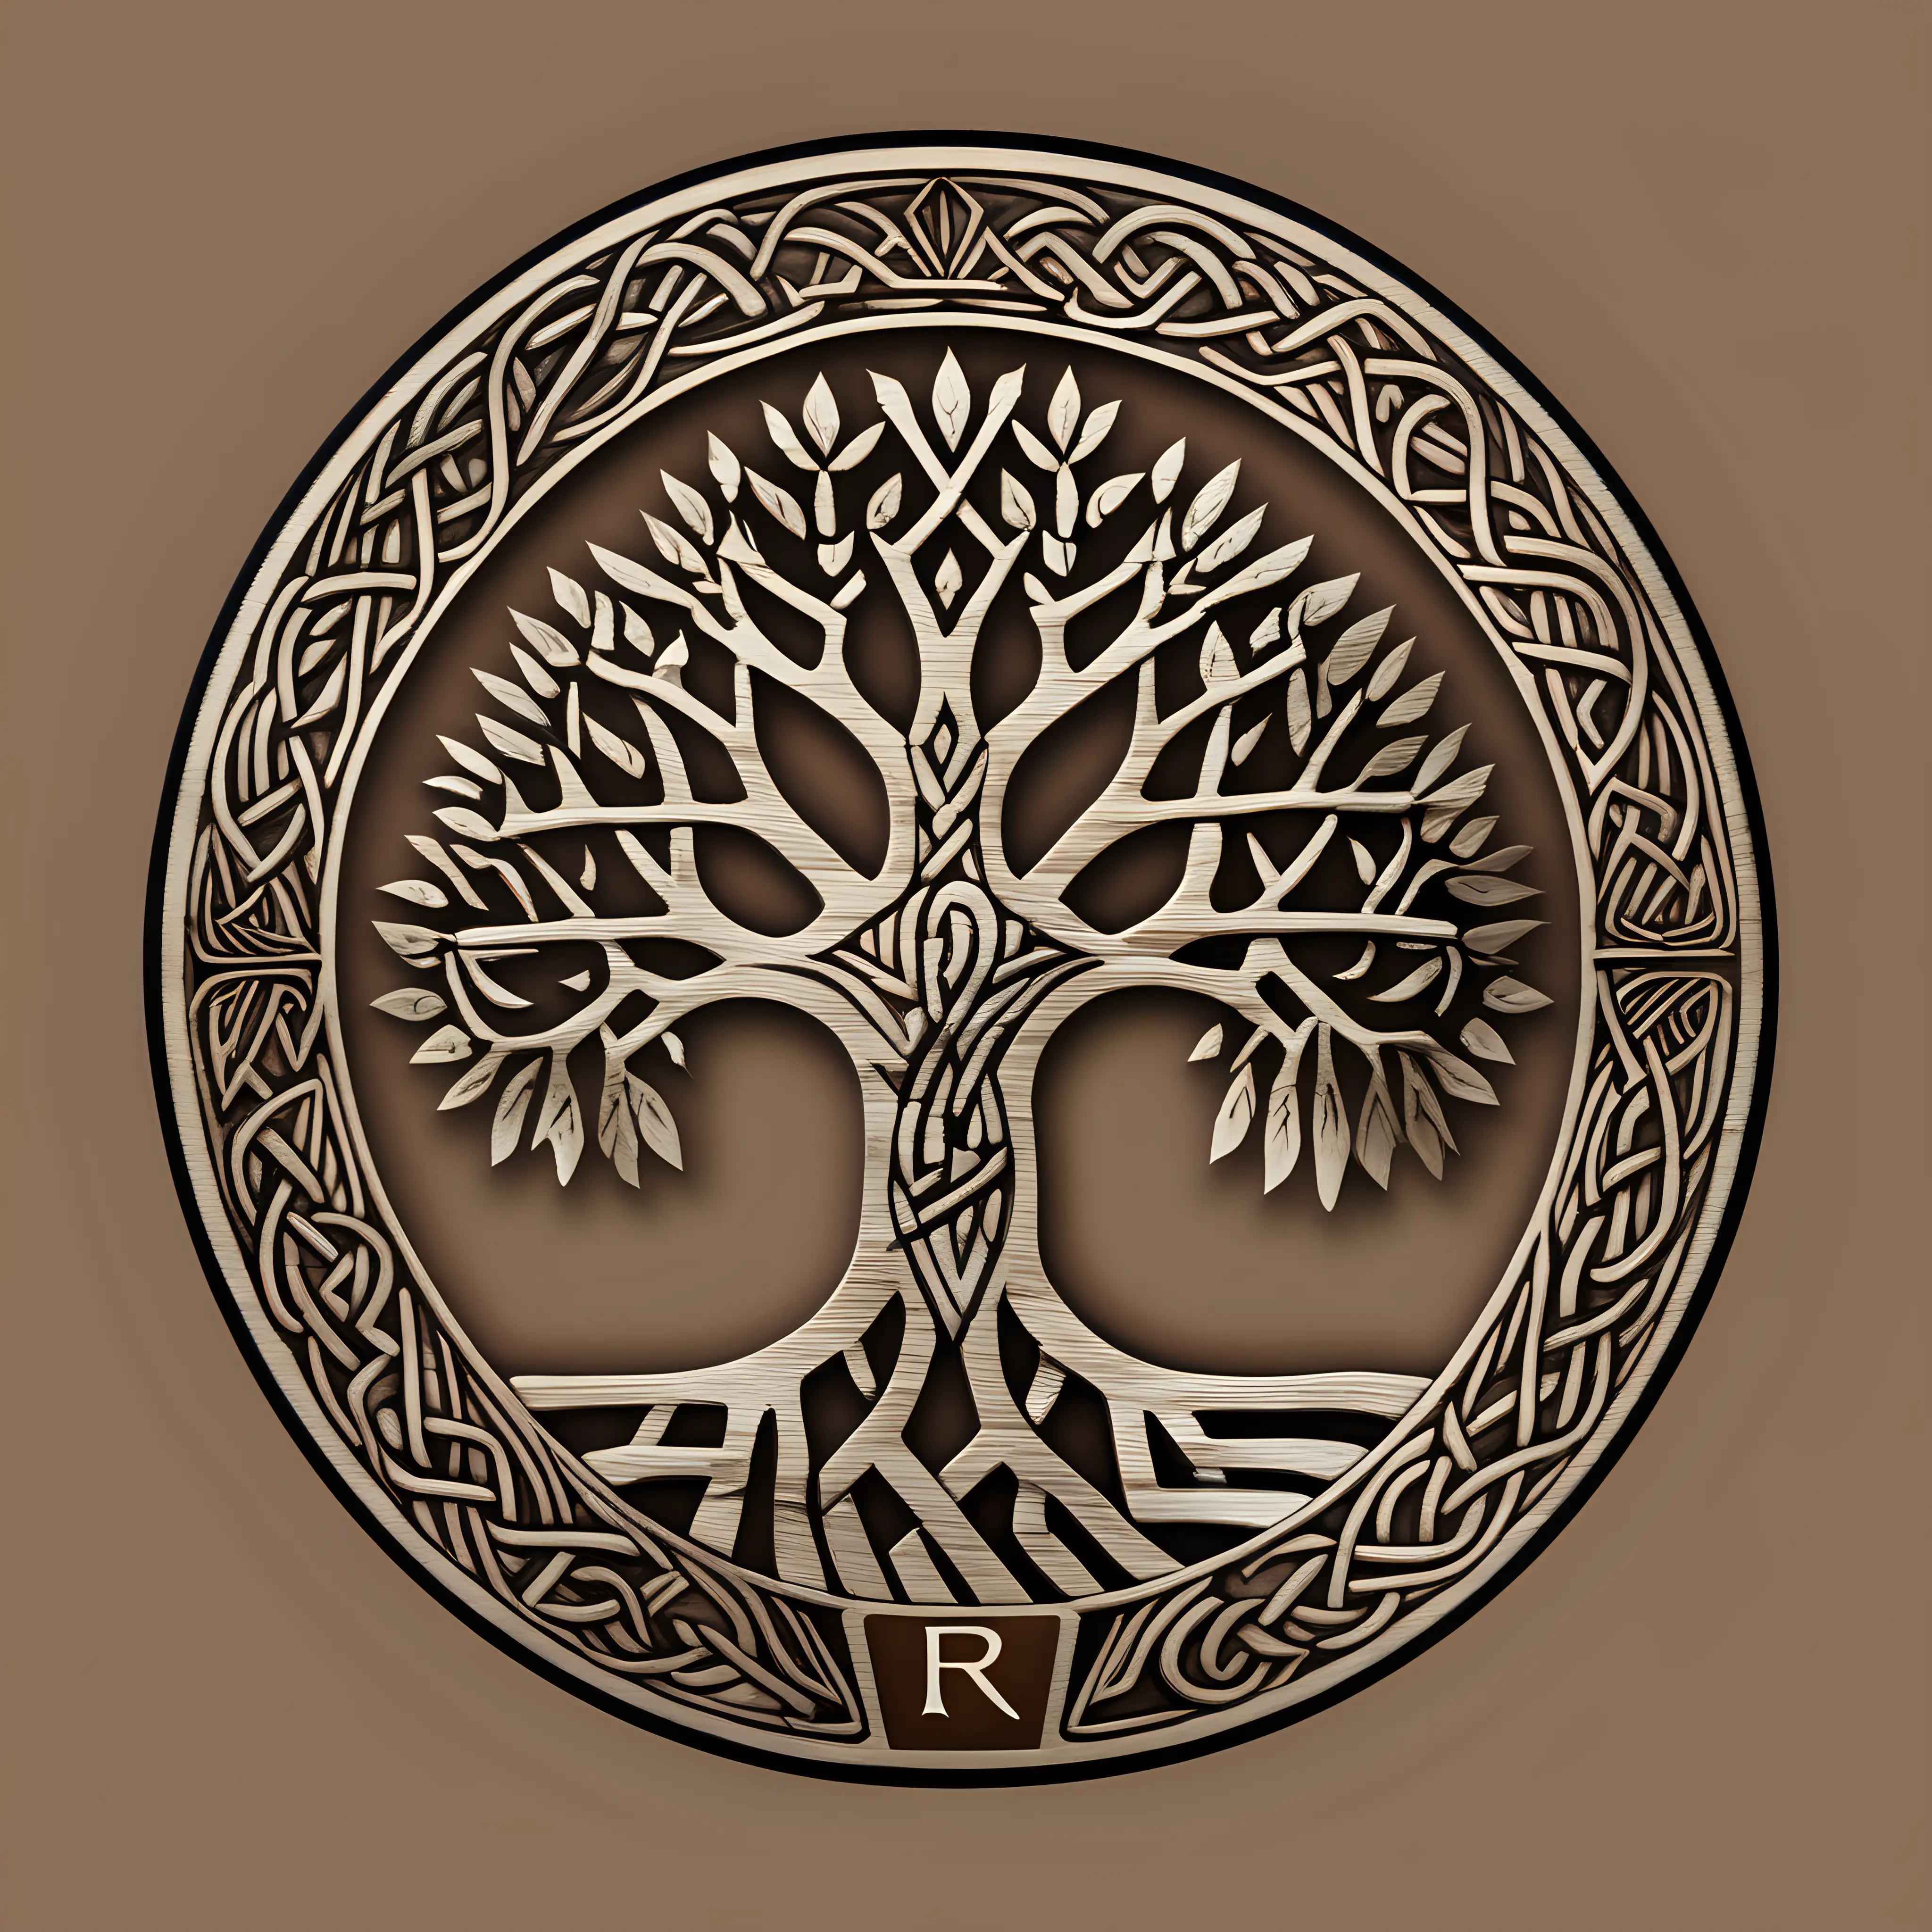 For the logo of "Runa":

Visualize a robust tree with Viking runes etched into its trunk, representing strength and wisdom. The branches form a triskelion motif, symbolizing resilience and growth. Earthy tones and bold typography convey the company's essence succinctly.



